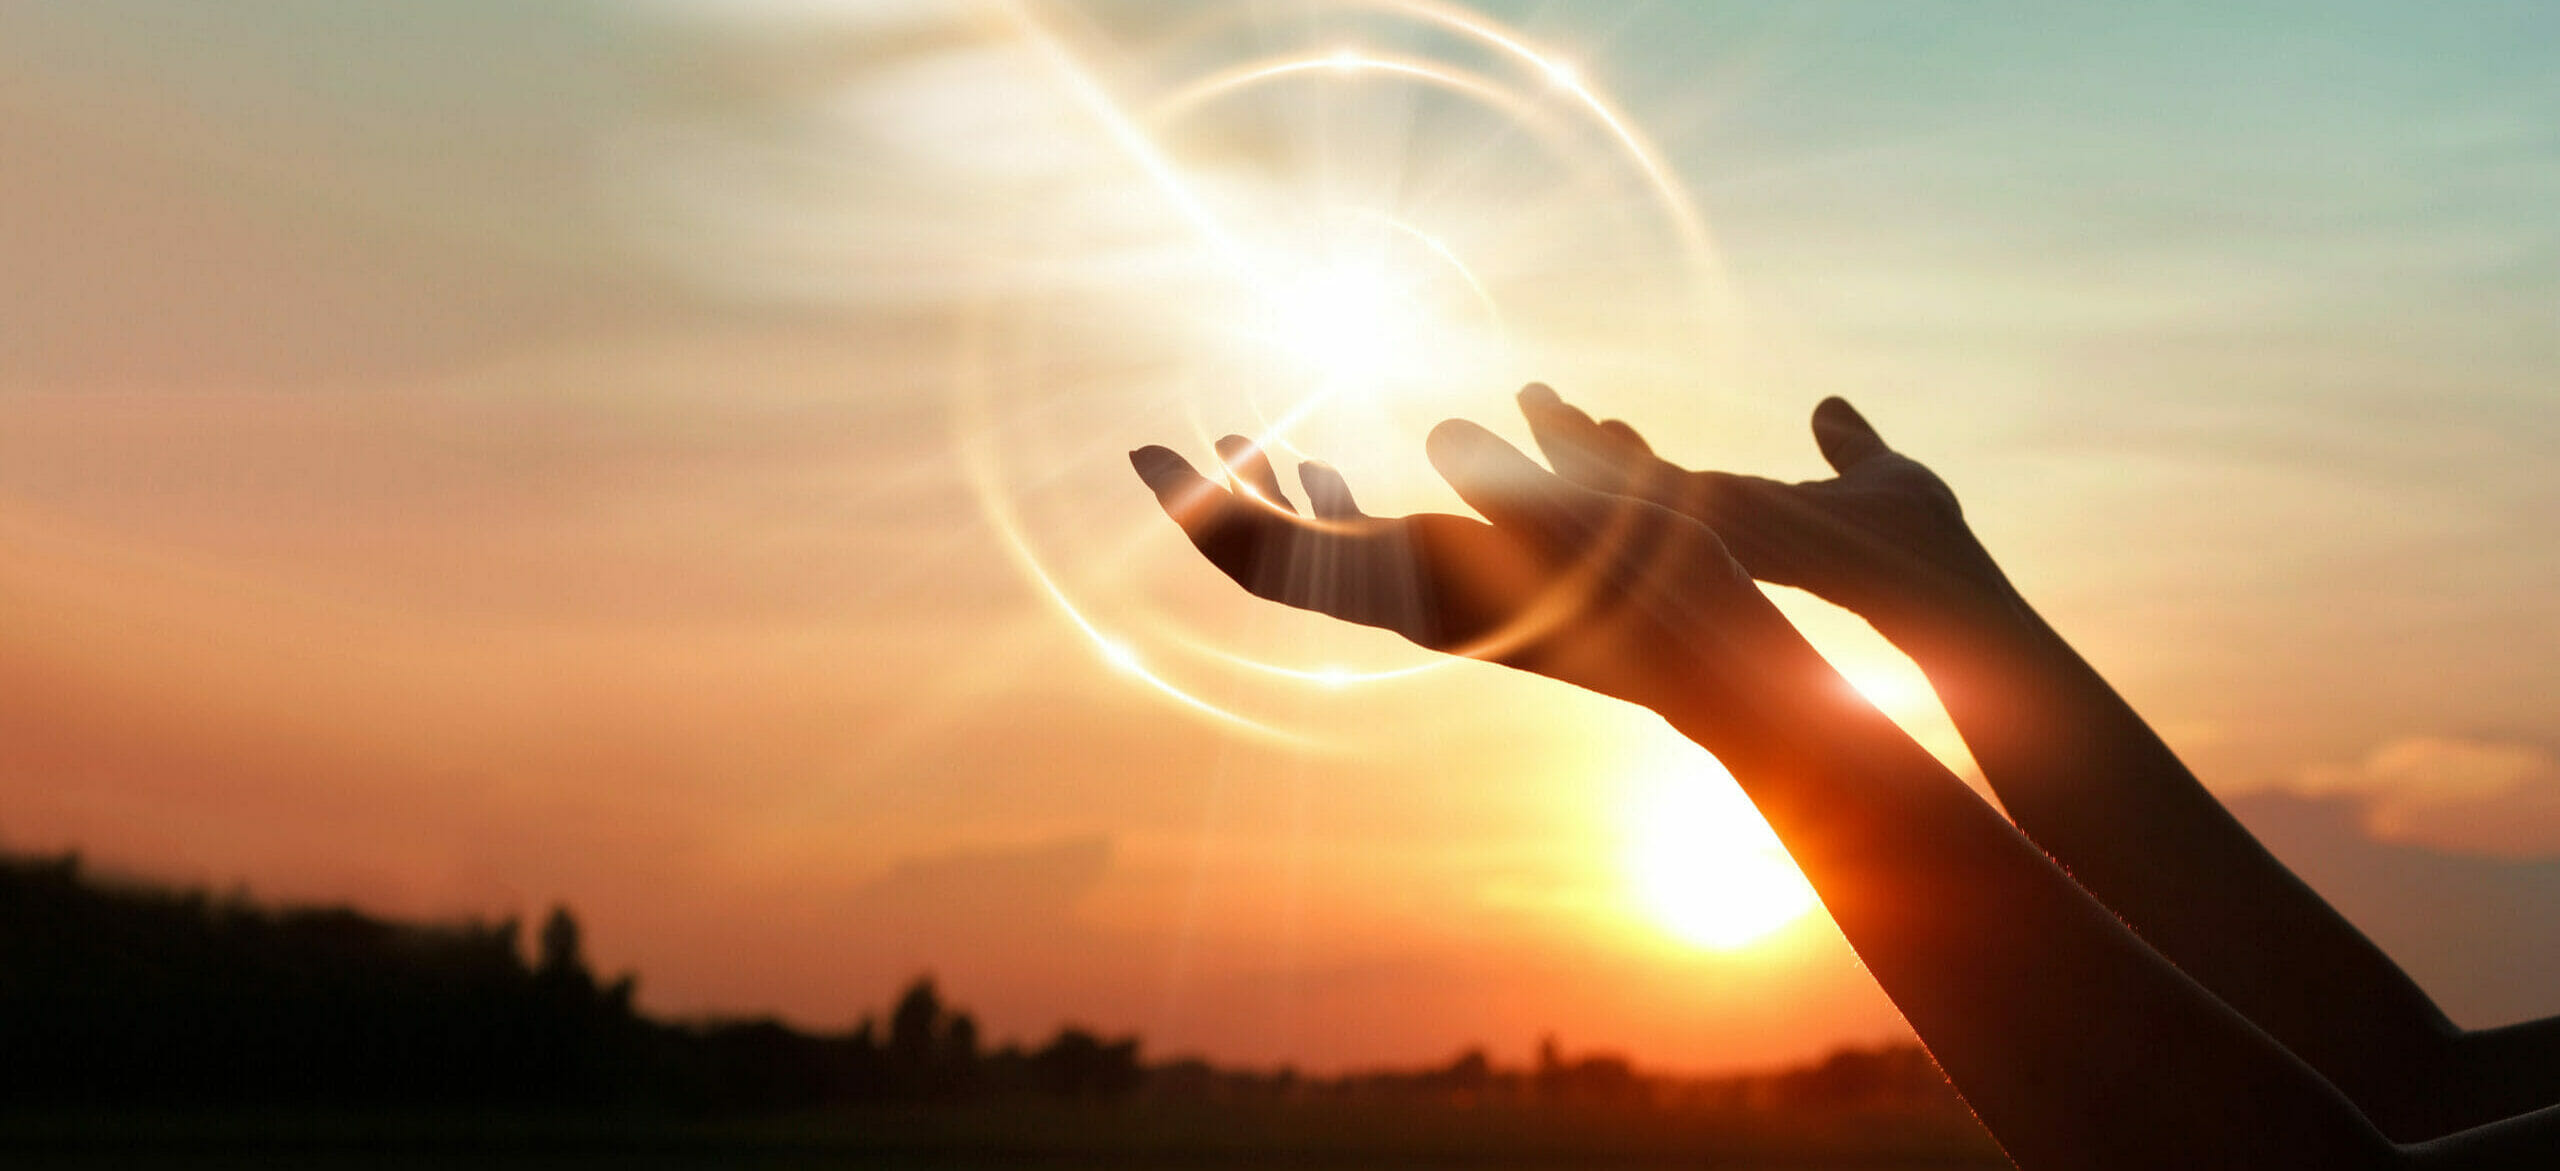 Contact: Woman hands praying for blessing from god on sunset background